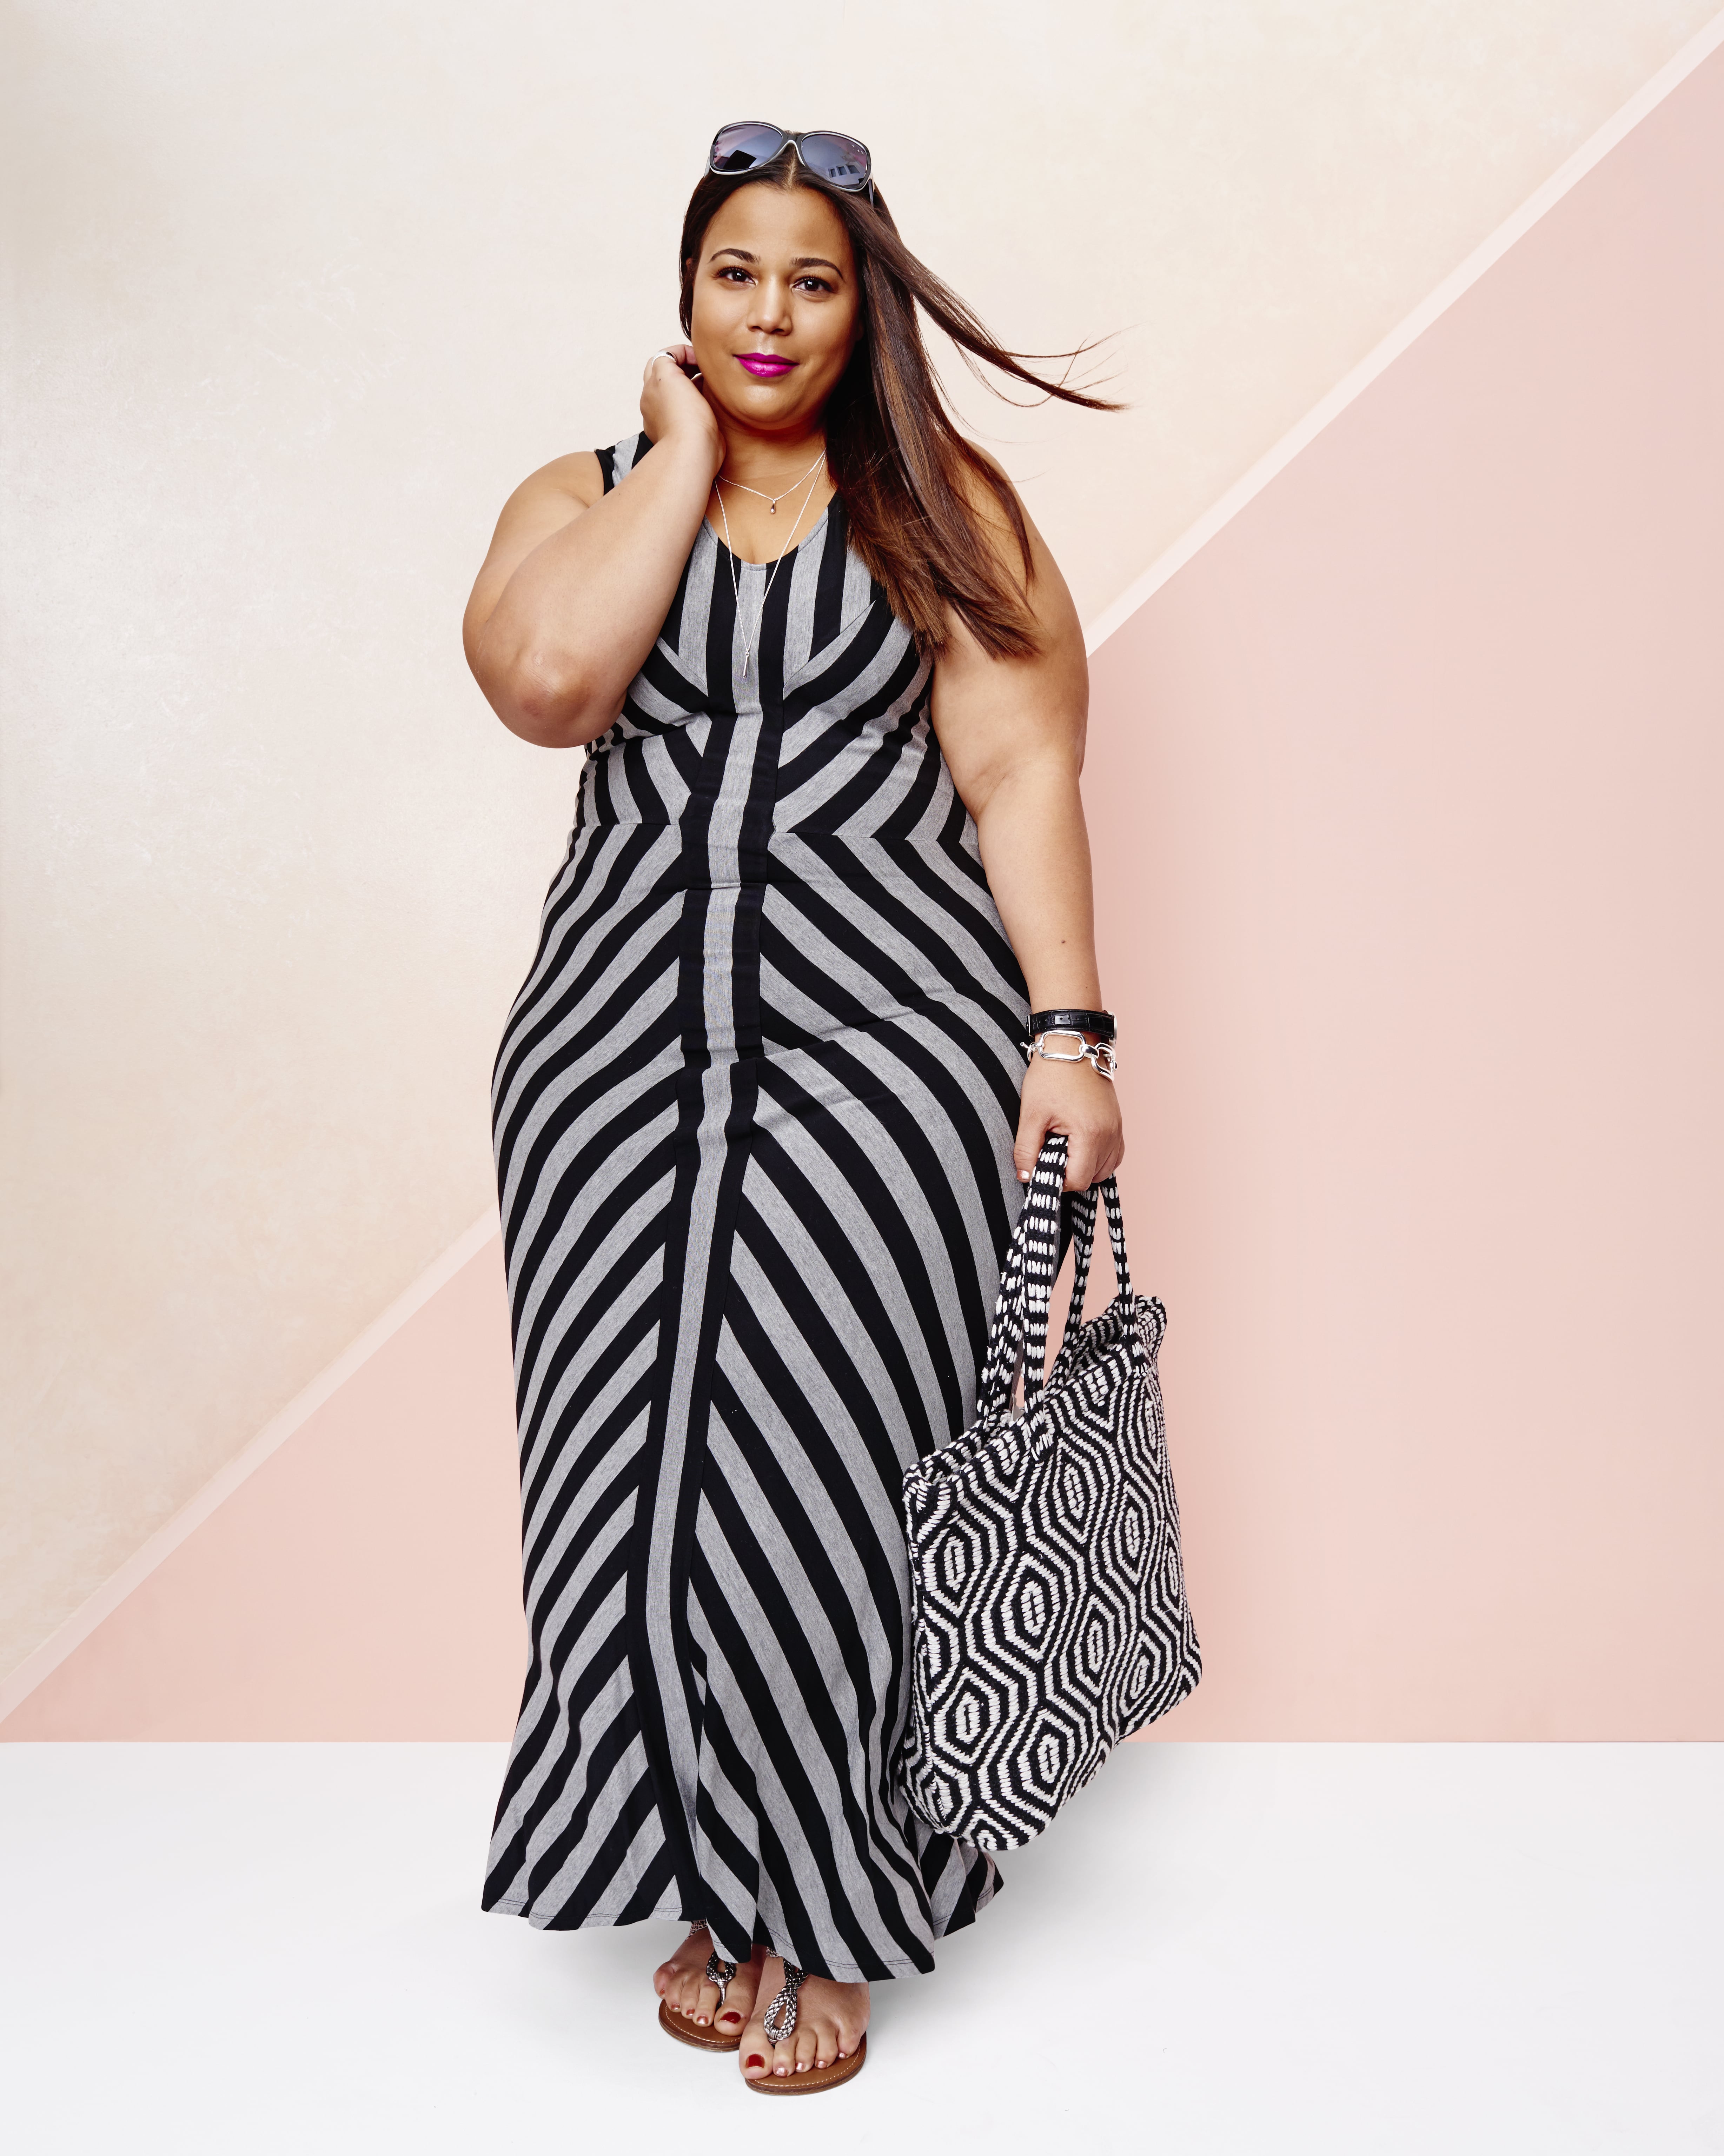 Target Takes On The Plus Size Market With In-House Ava & Viv Label